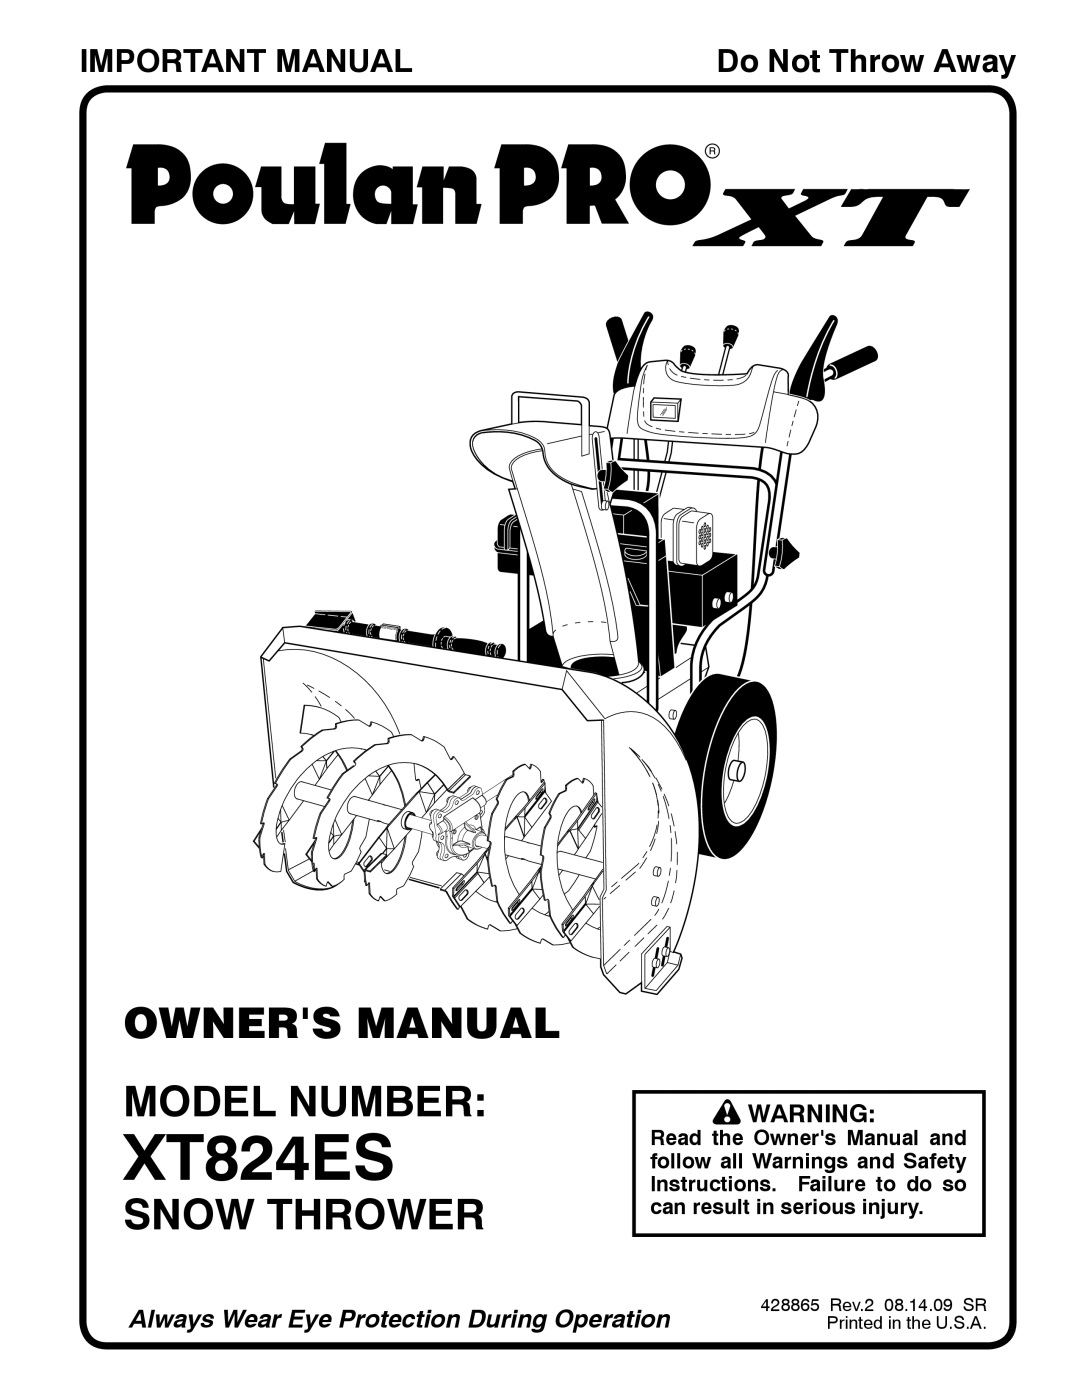 Poulan XT824ES, 96192003300 owner manual Owners Manual Model Number, Snow Thrower, Important Manual, Do Not Throw Away 